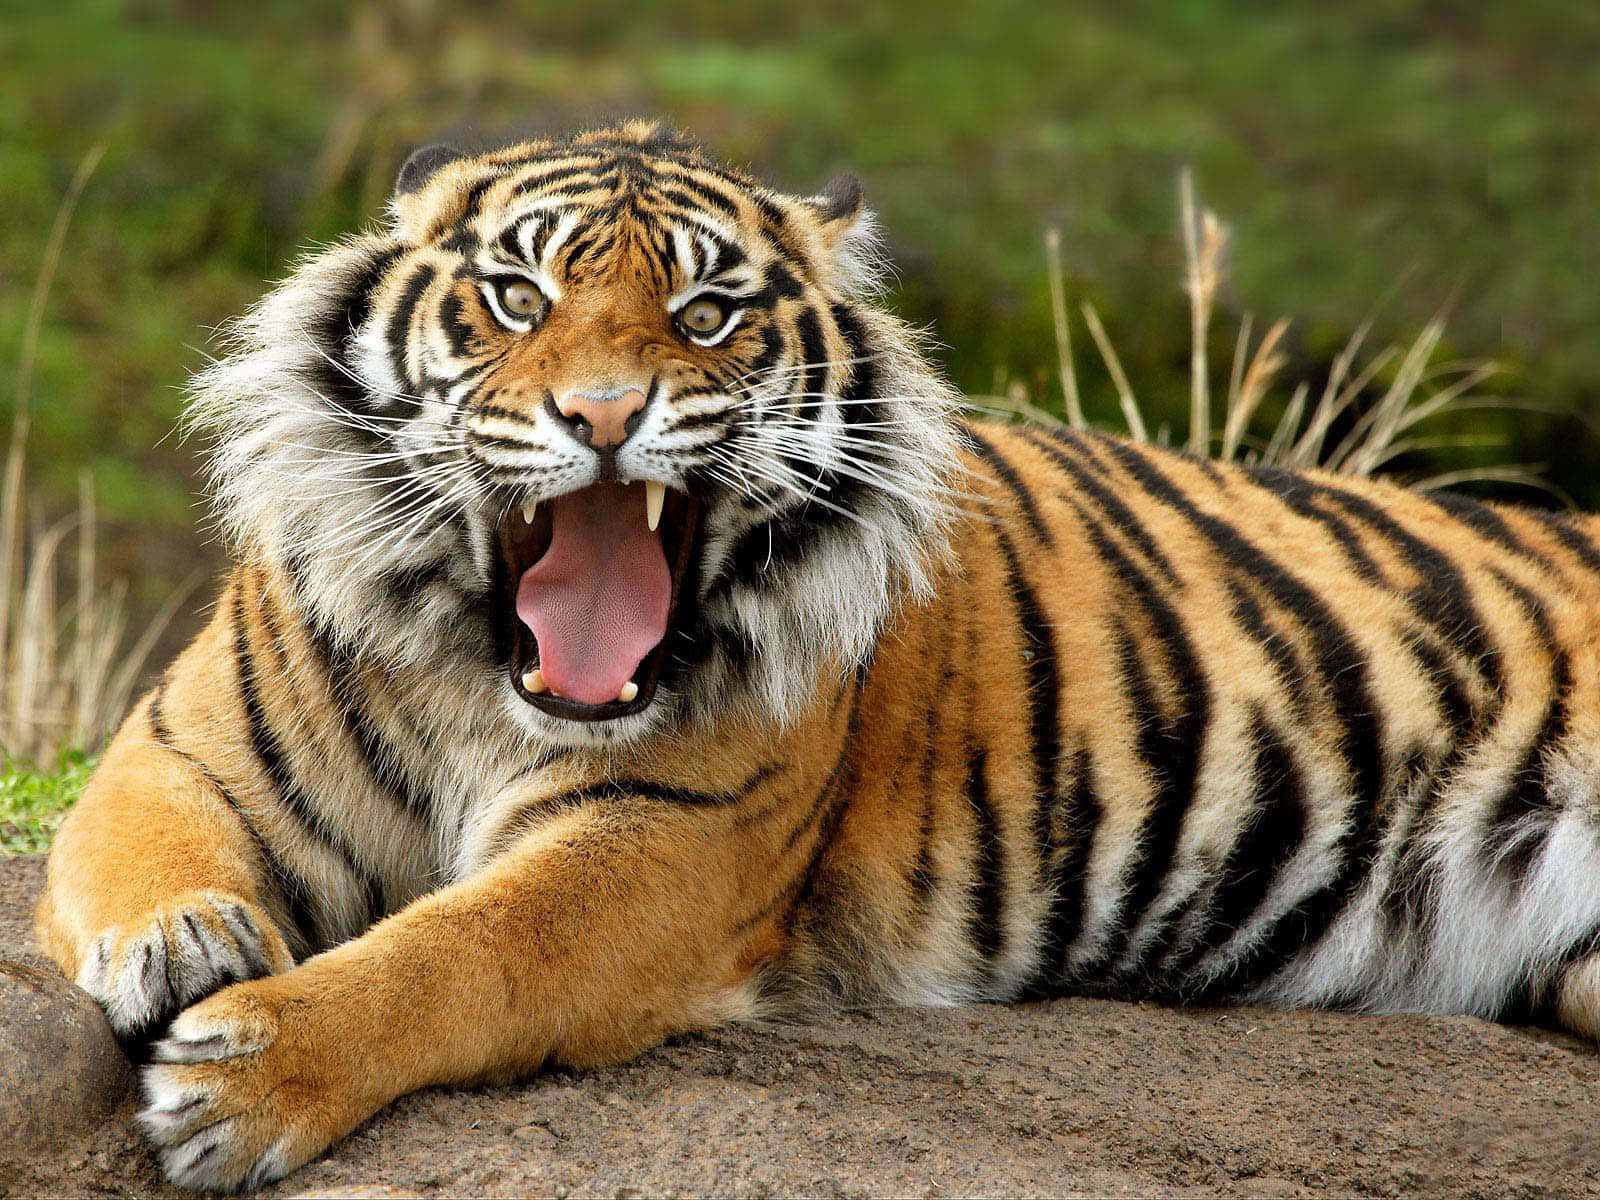 A Tiger Laying On A Rock